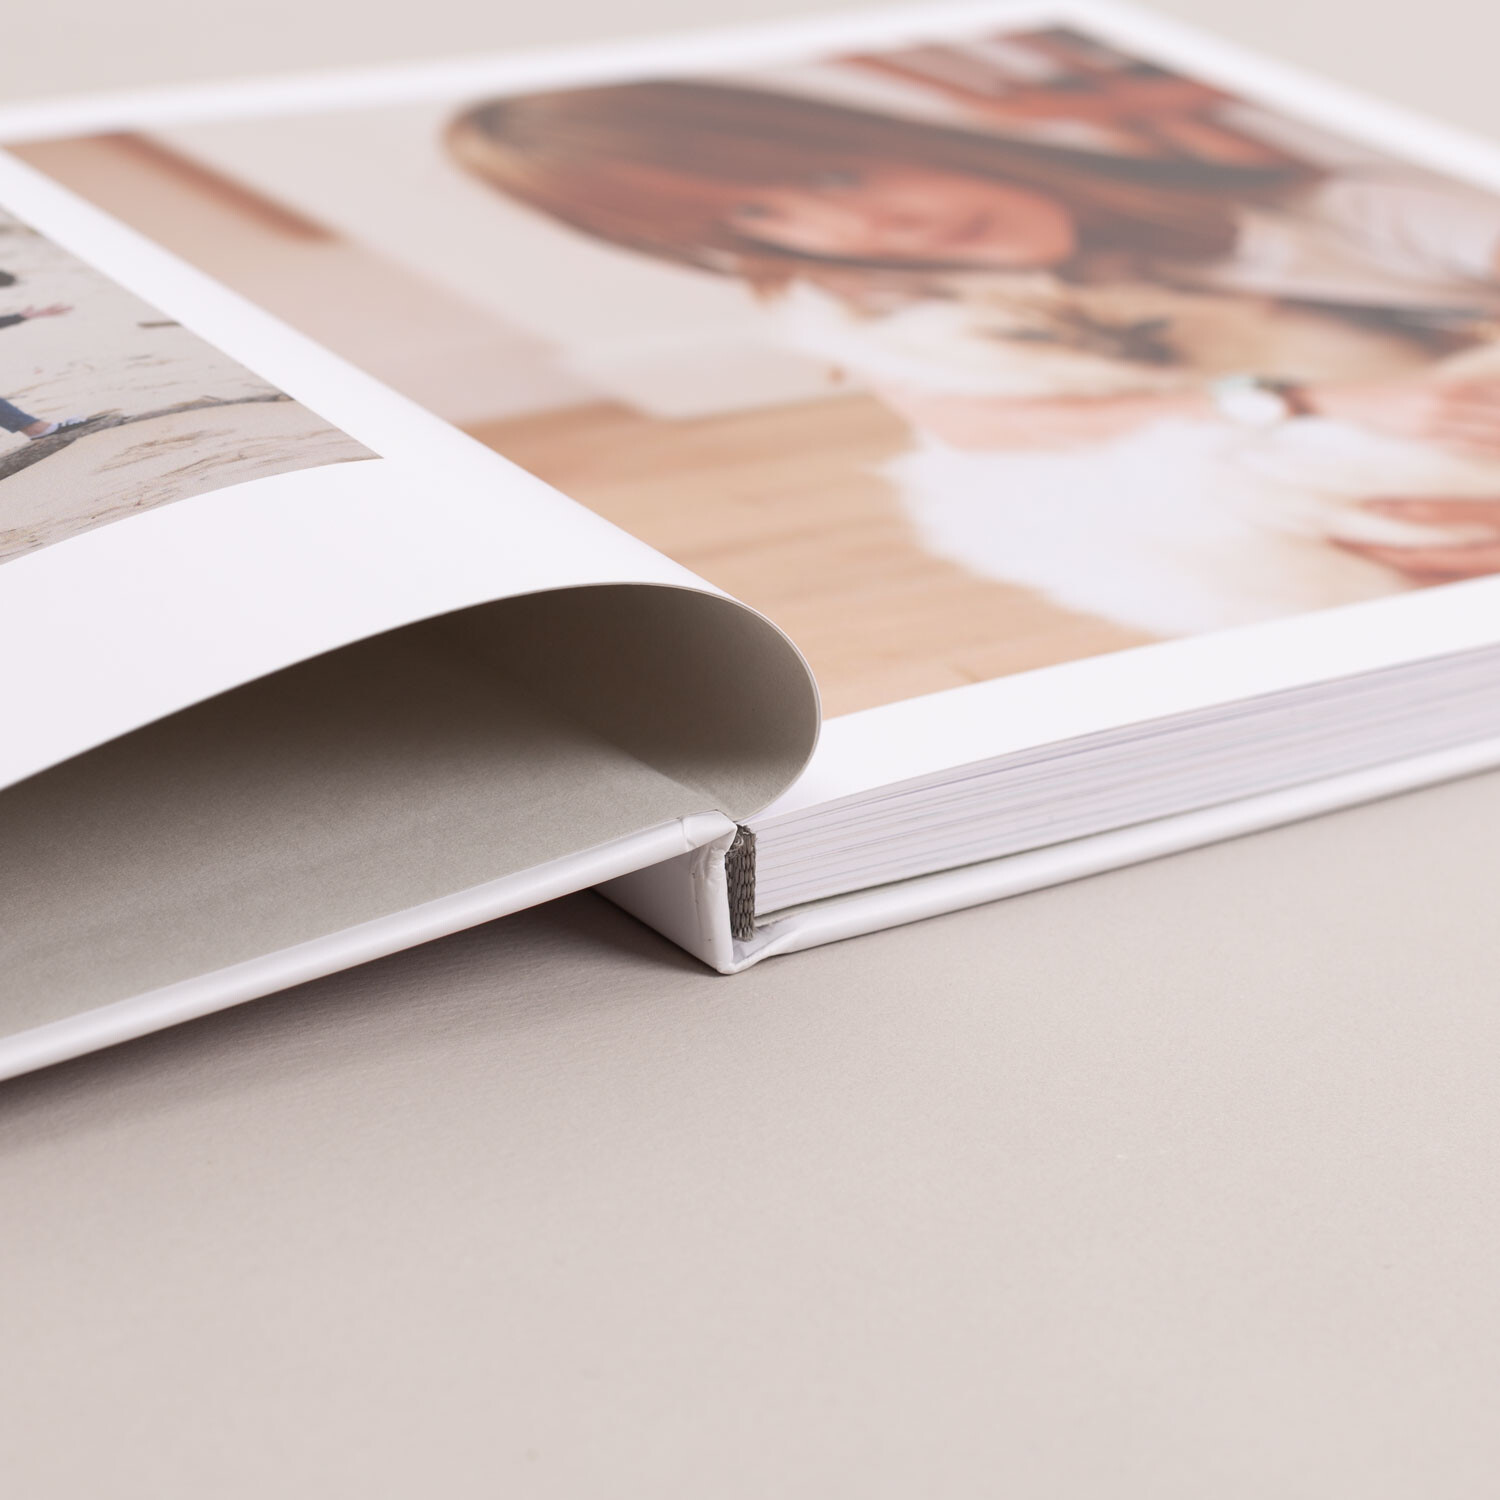 A4 Photo Album: Create and print your photo albums in A4 format at